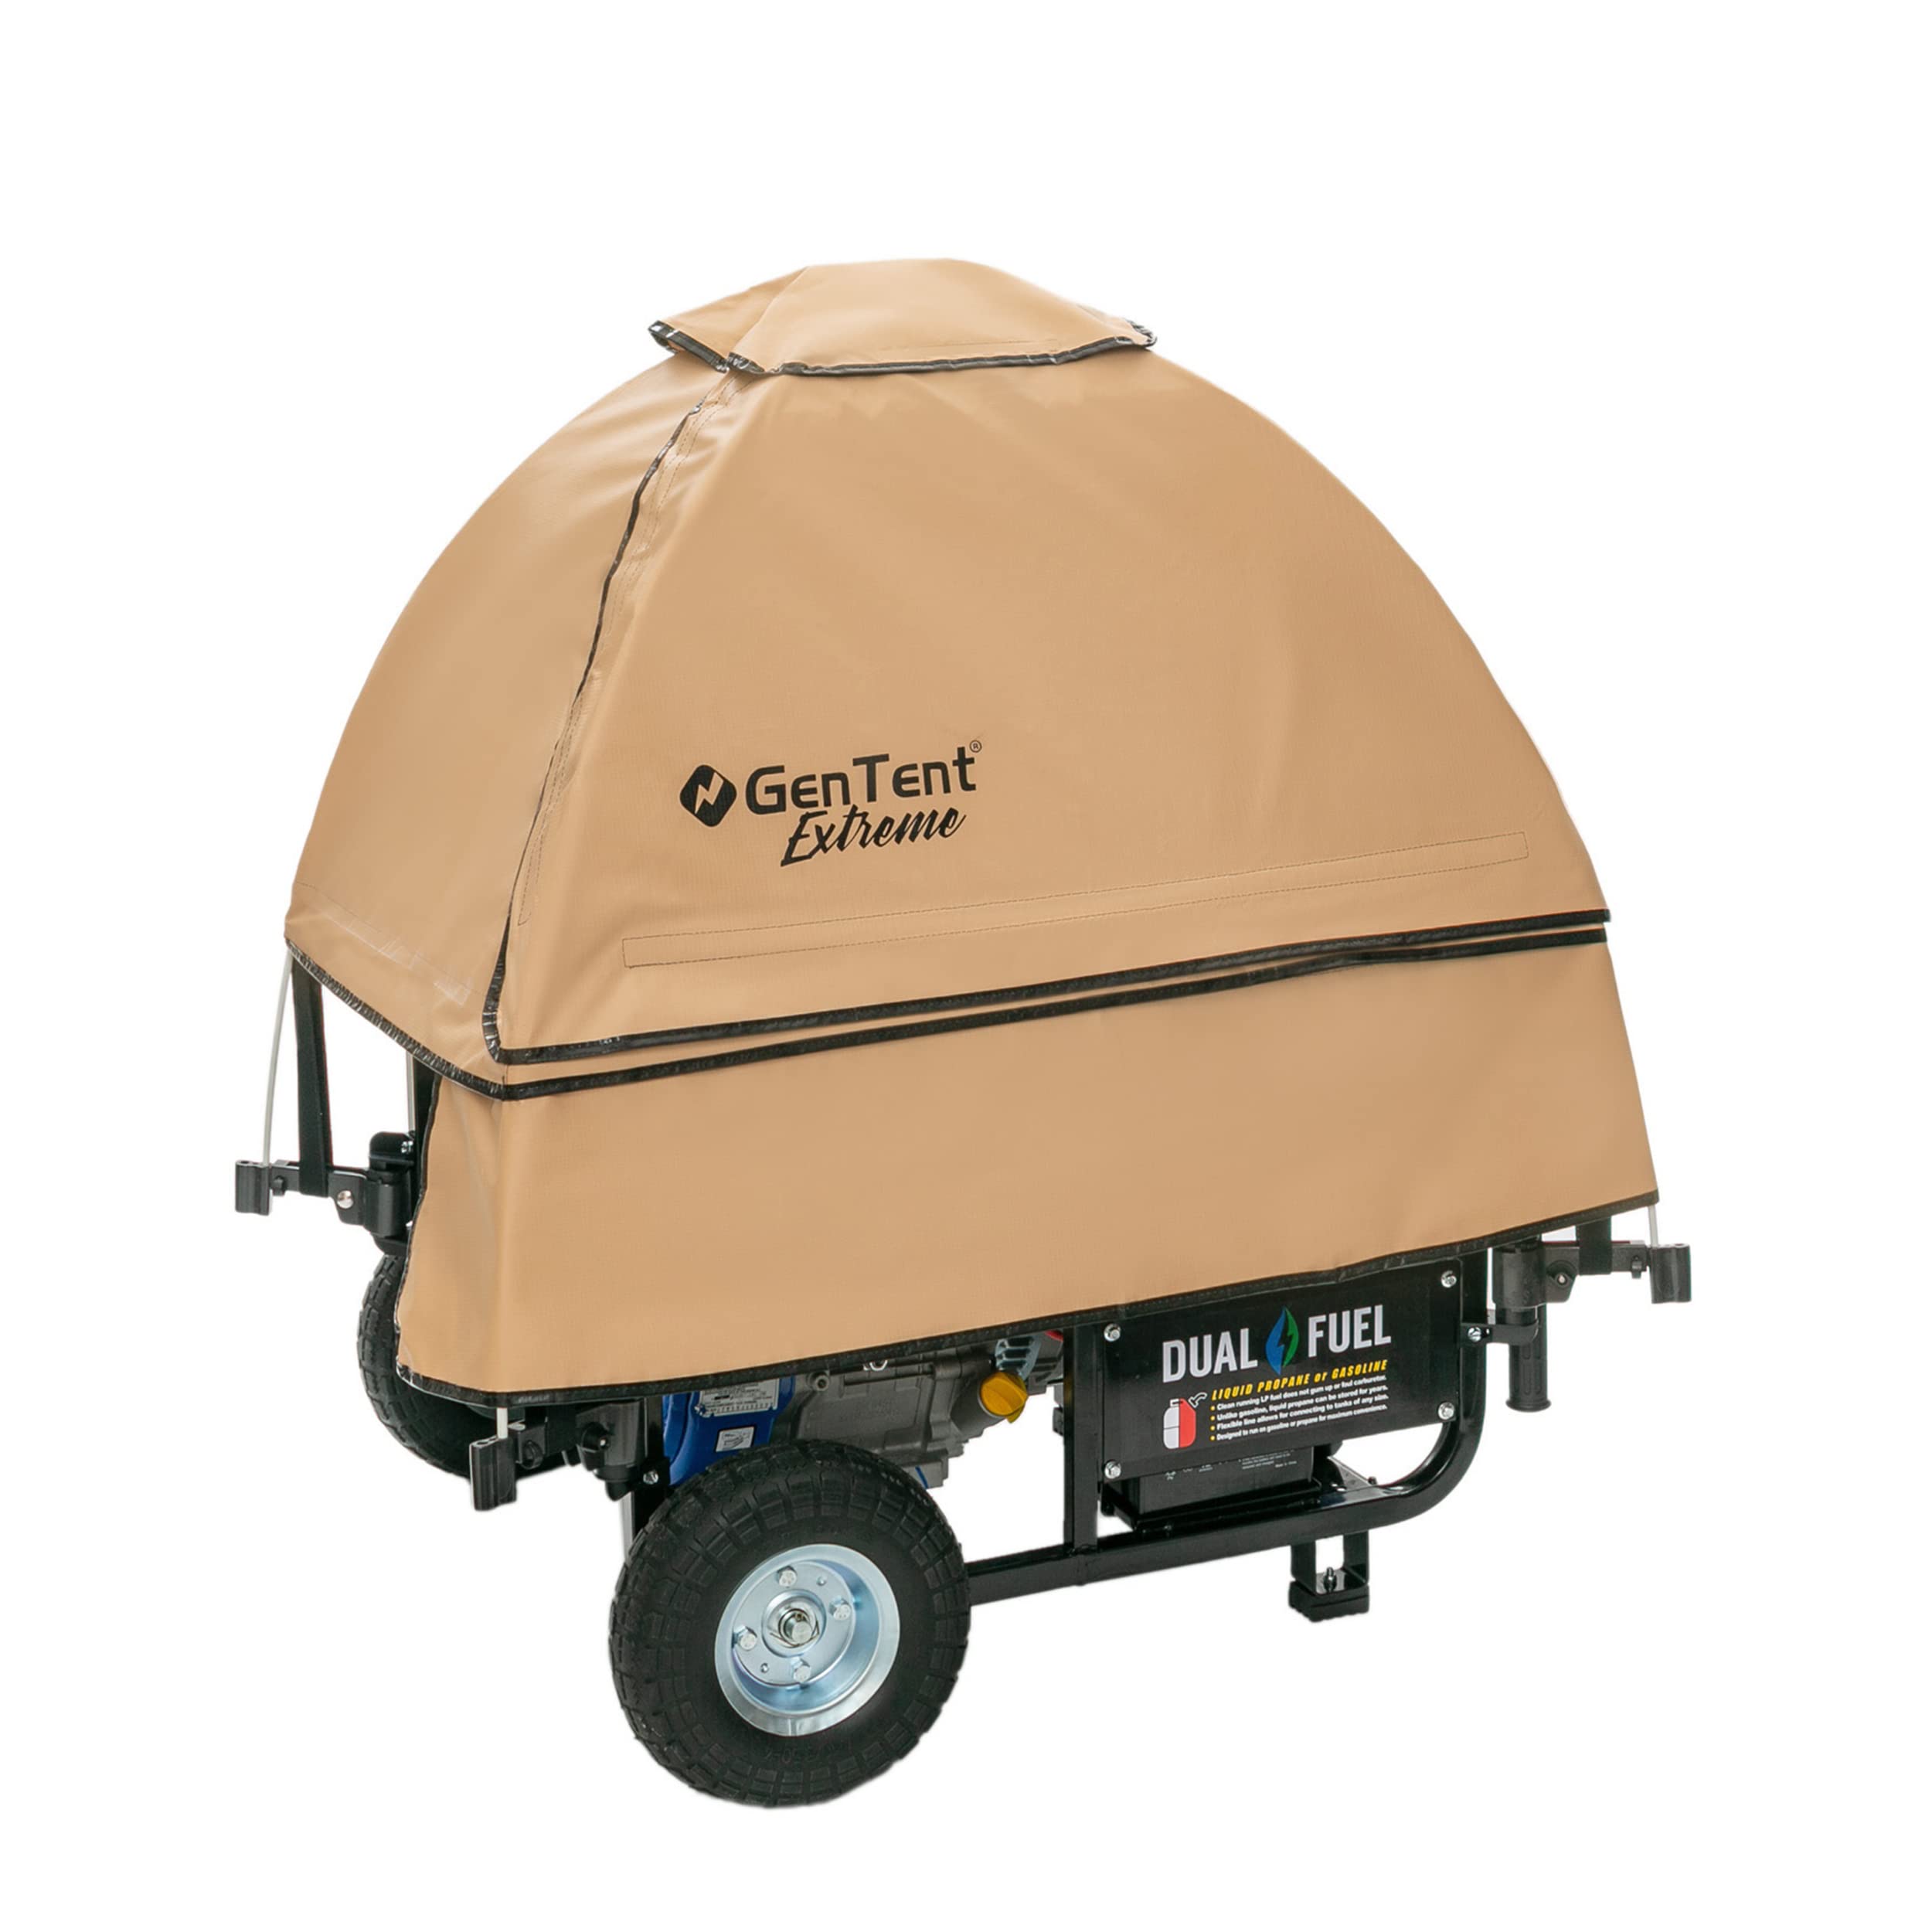 GenTent Safety Canop genTent generator Running cover - Universal Kit (Extreme, Tan) - for Open Frame Portable generators